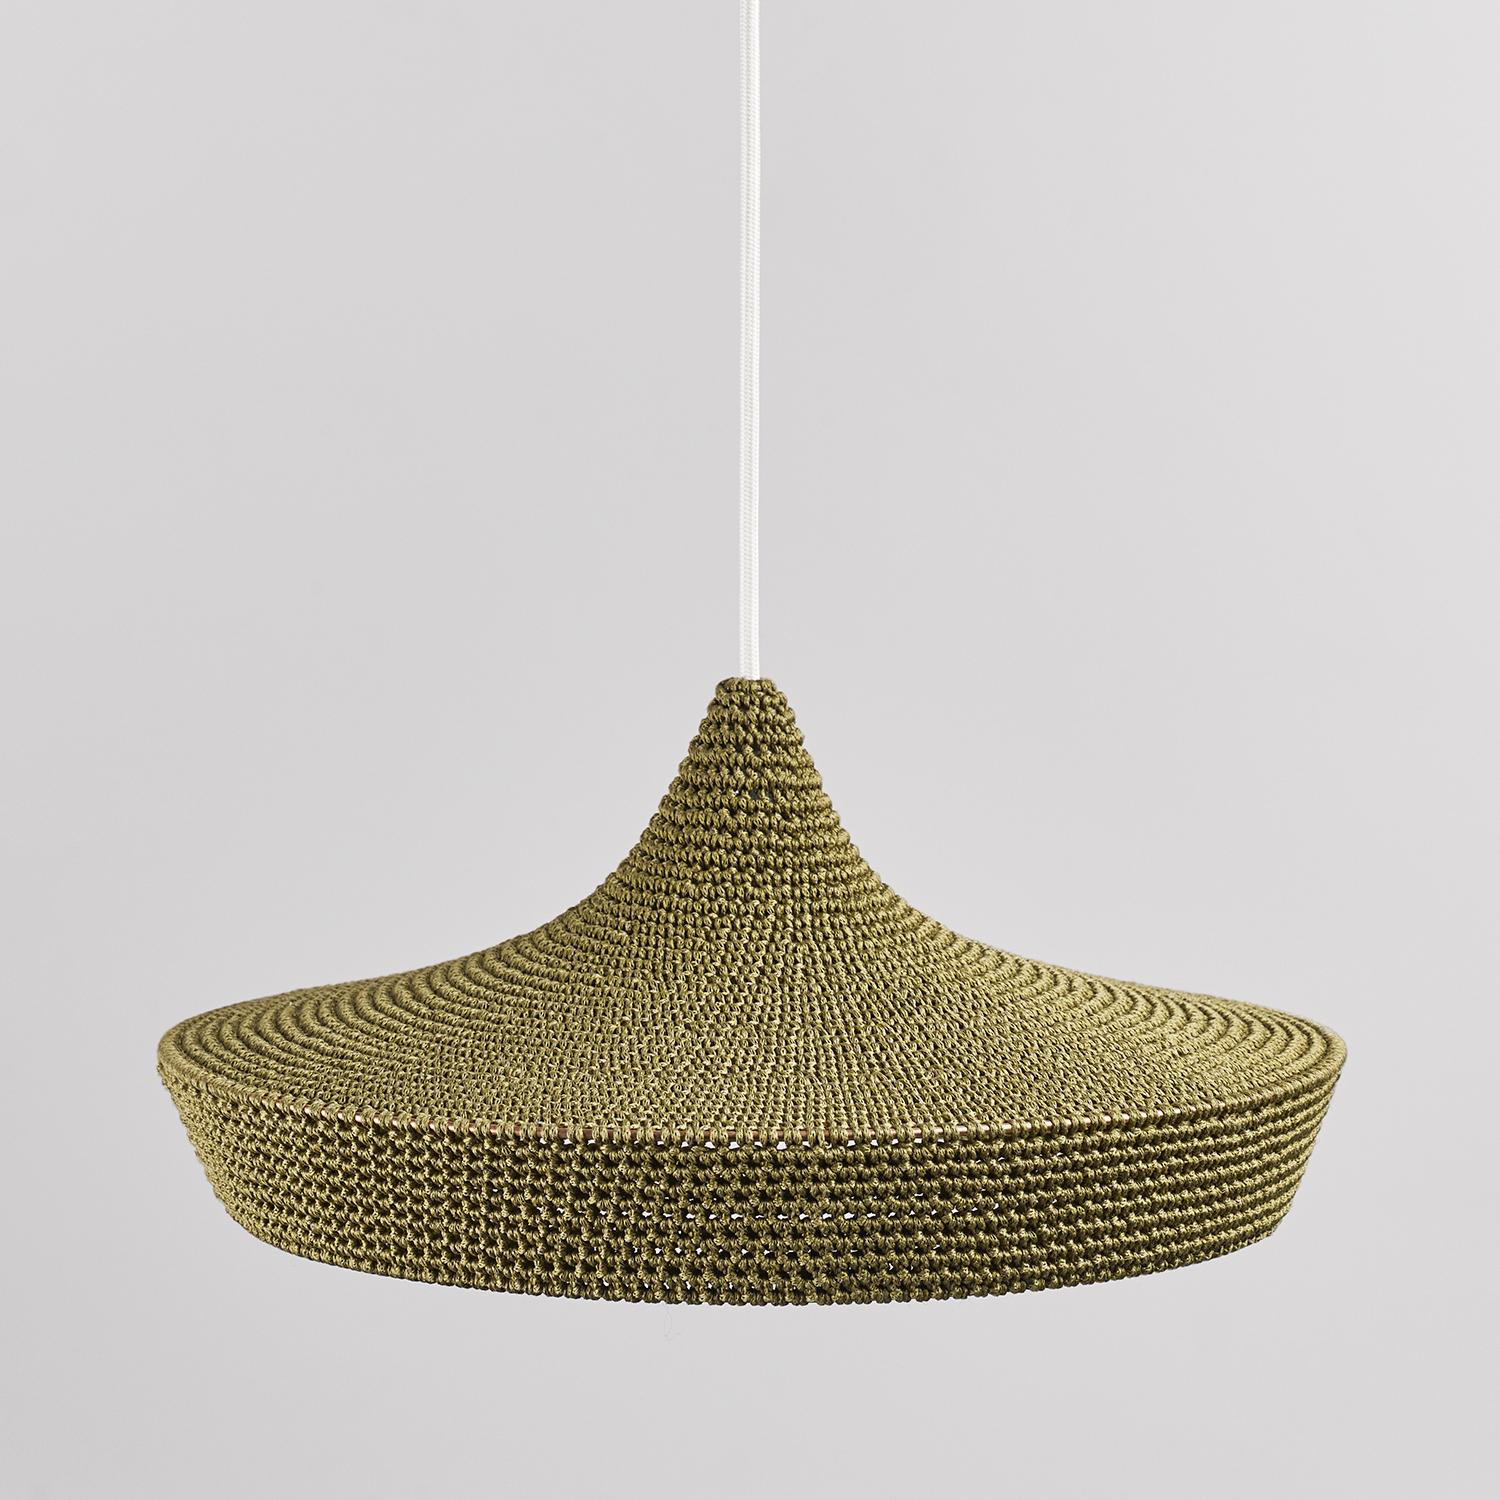 British CAVE Pendant Light Ø40cm/15.7in, Hand Crocheted in 100% Egyptian Cotton For Sale